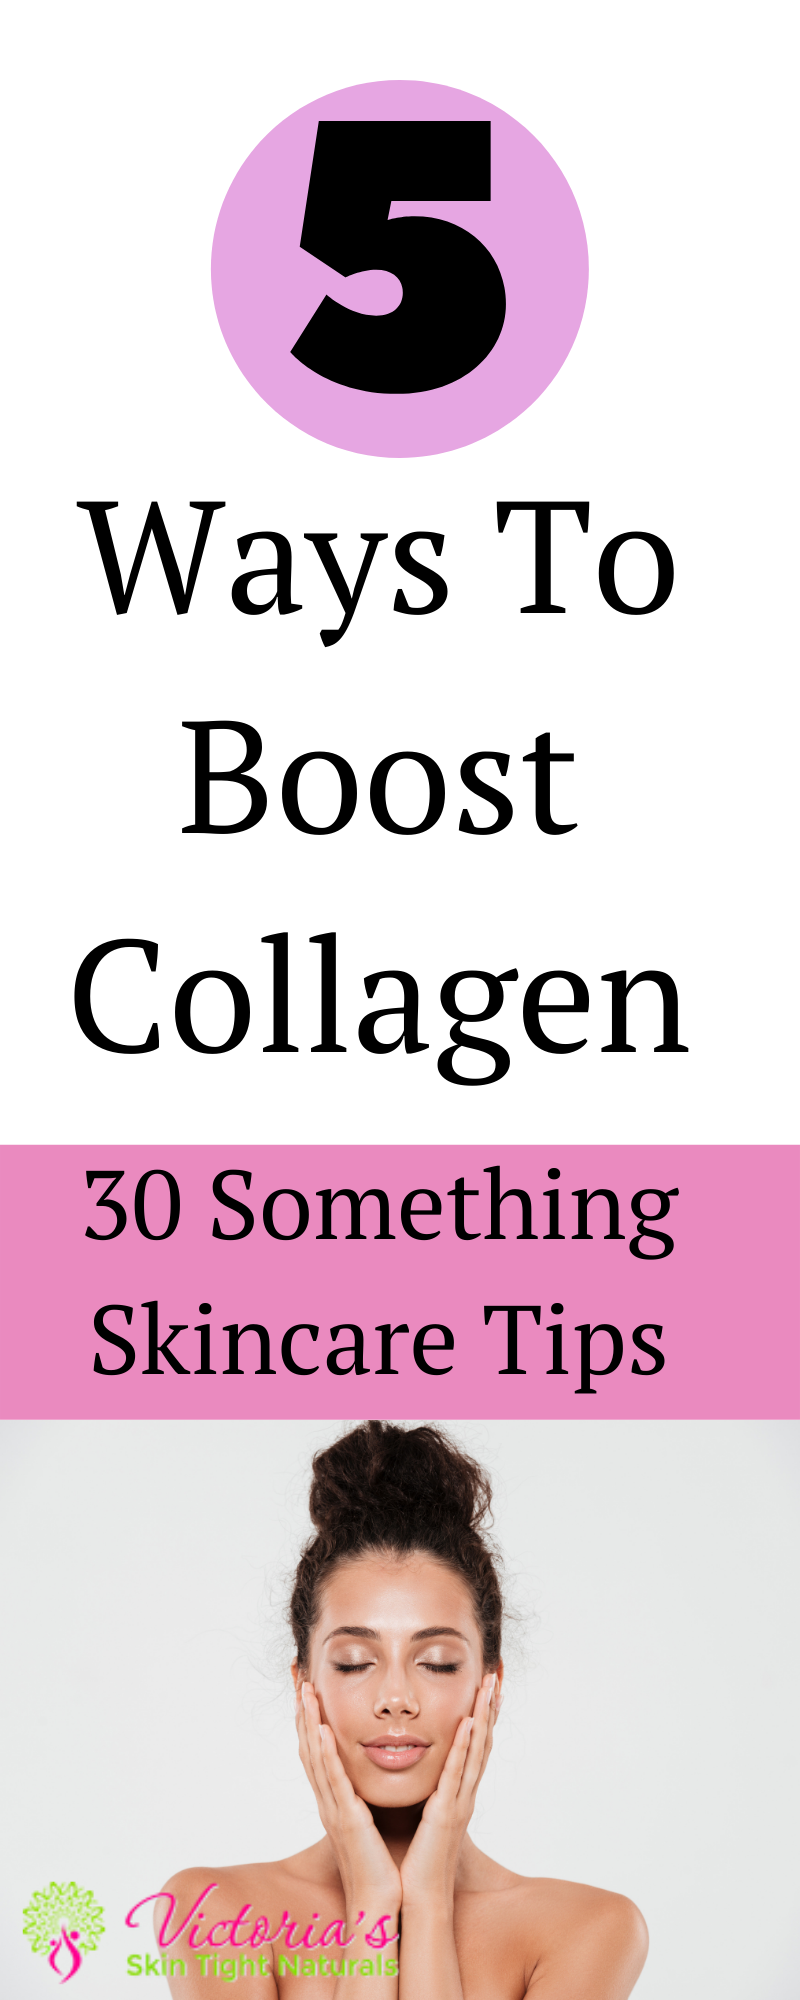 Skincare In Your 30s